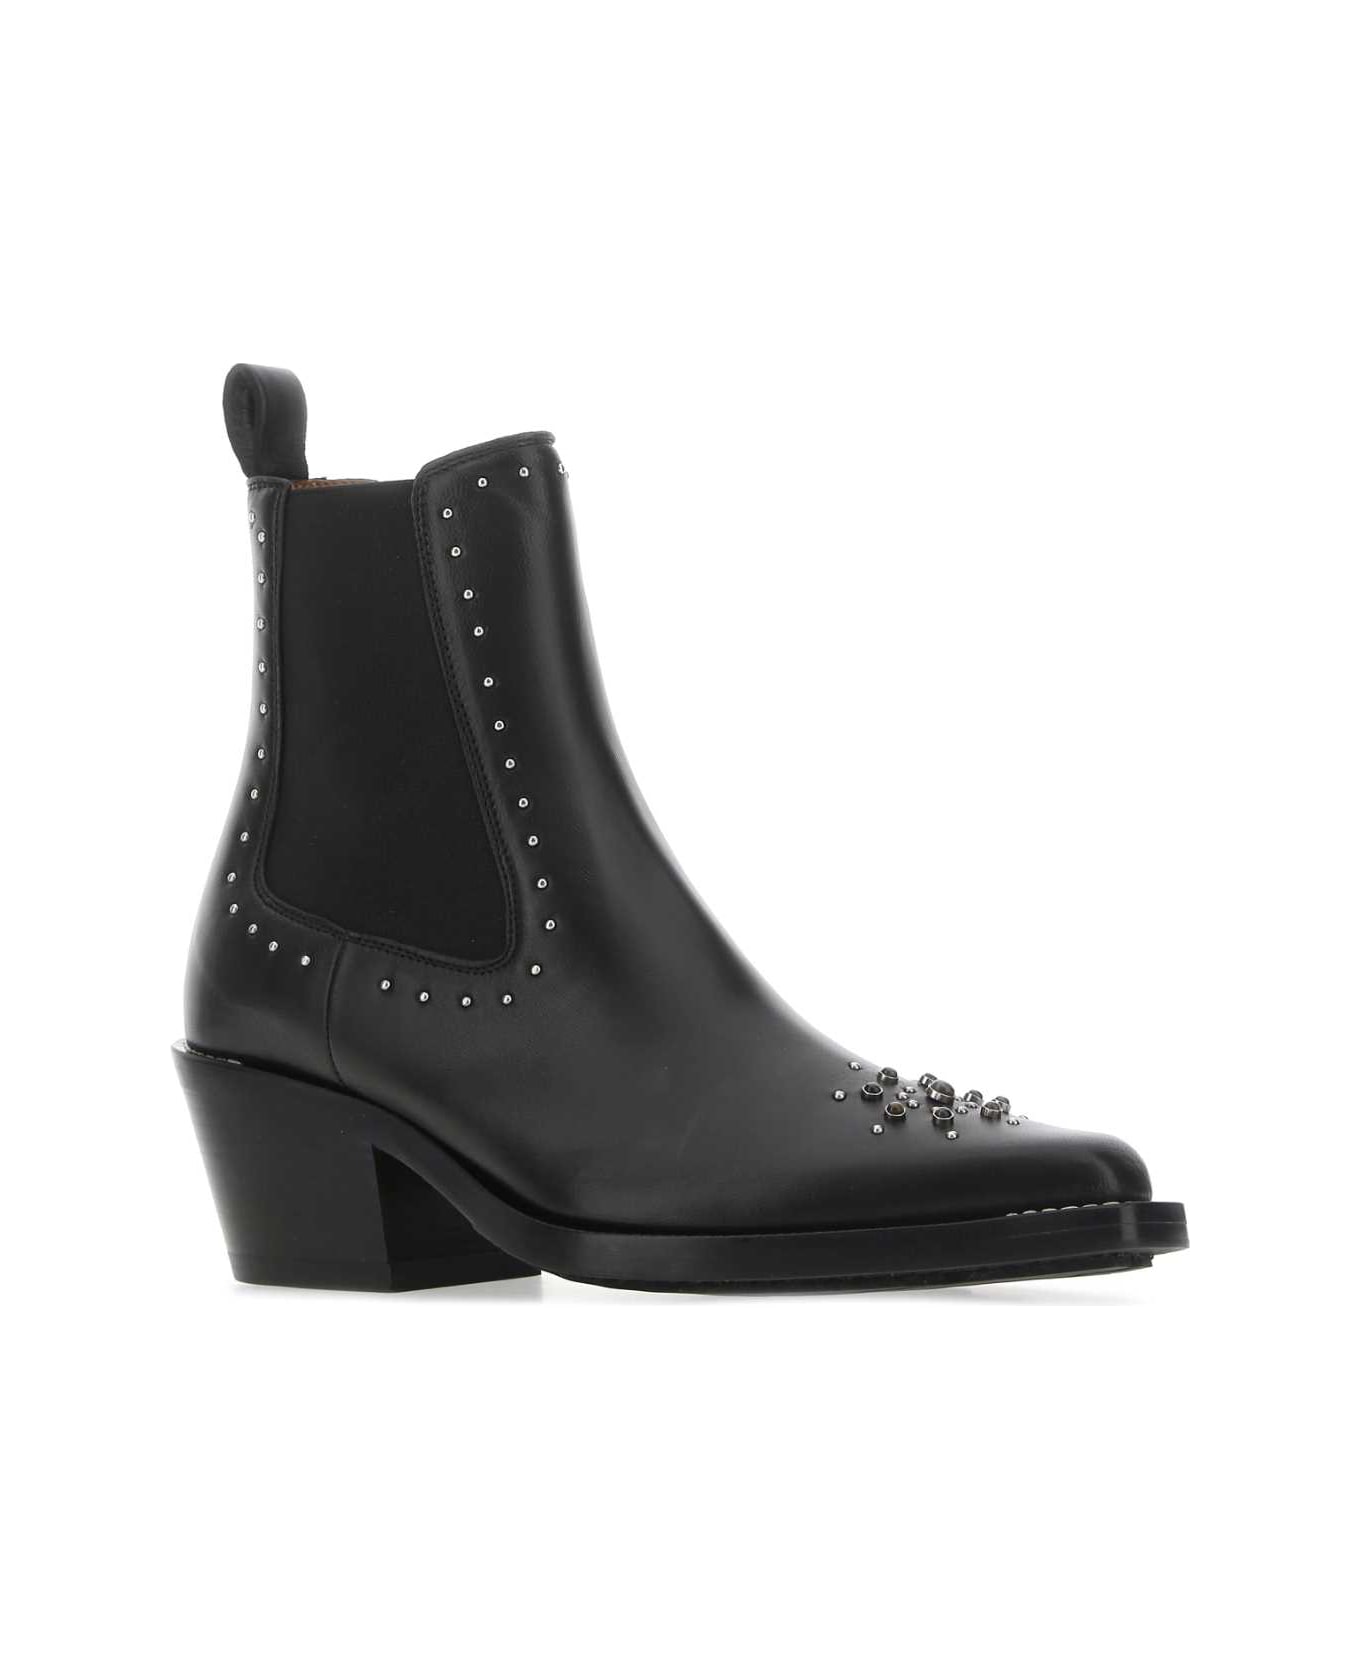 Chloé Black Leather Nellie Ankle Boots - 001